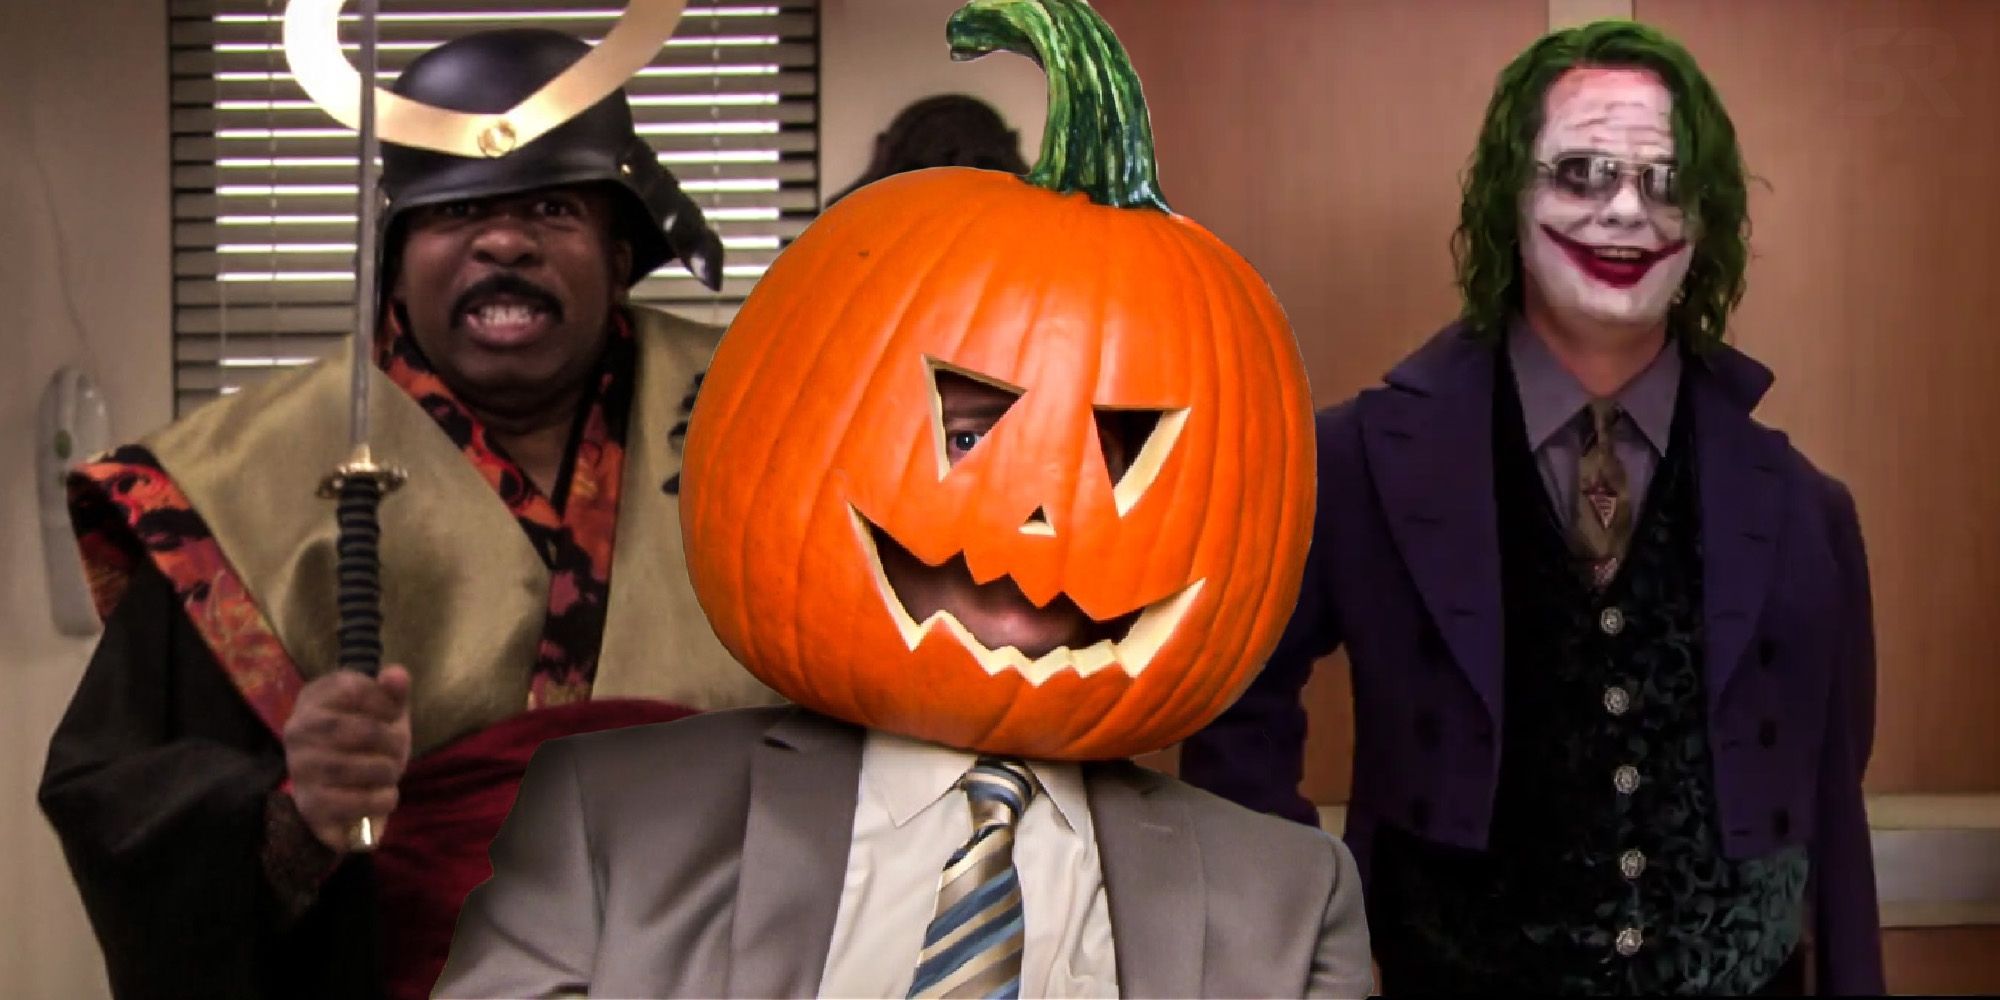 The Office: Every Halloween Costume Worn By The Major Characters